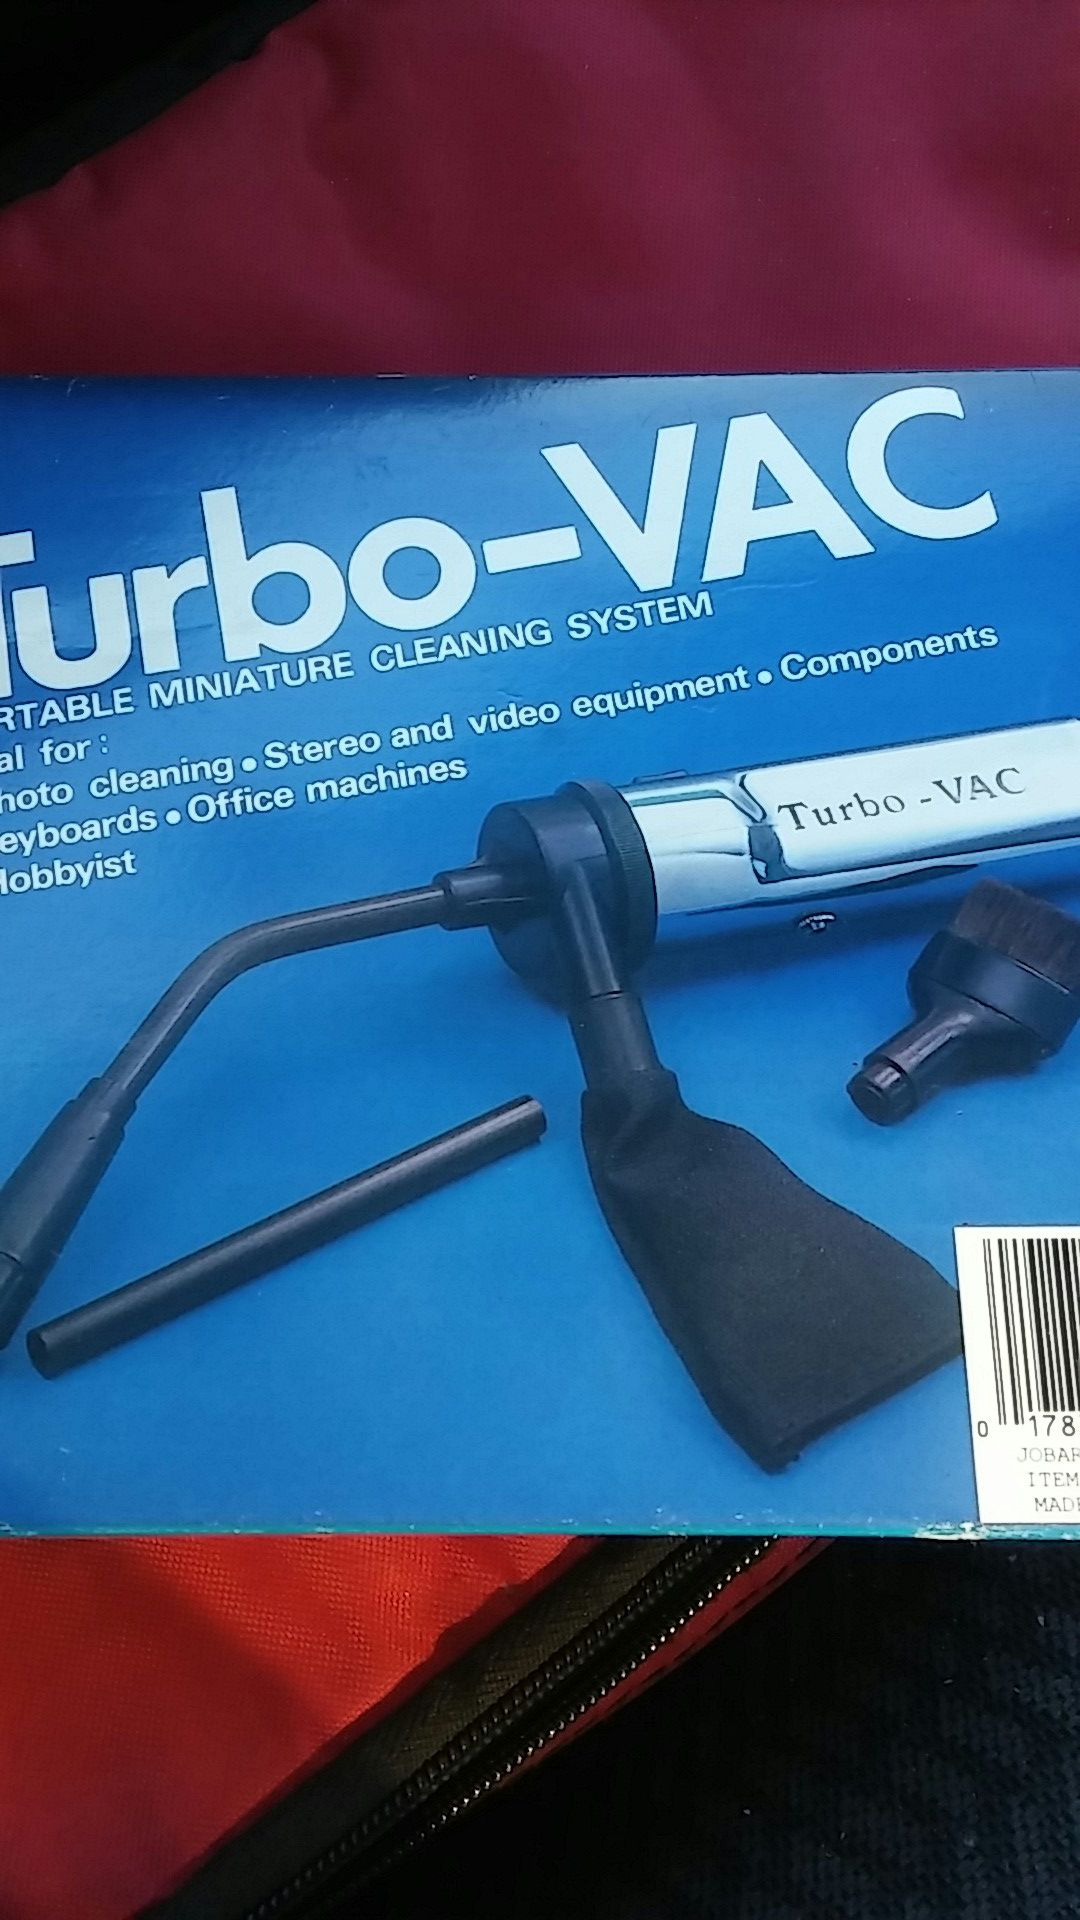 Turbo-Vac Portable miniature cleaning system